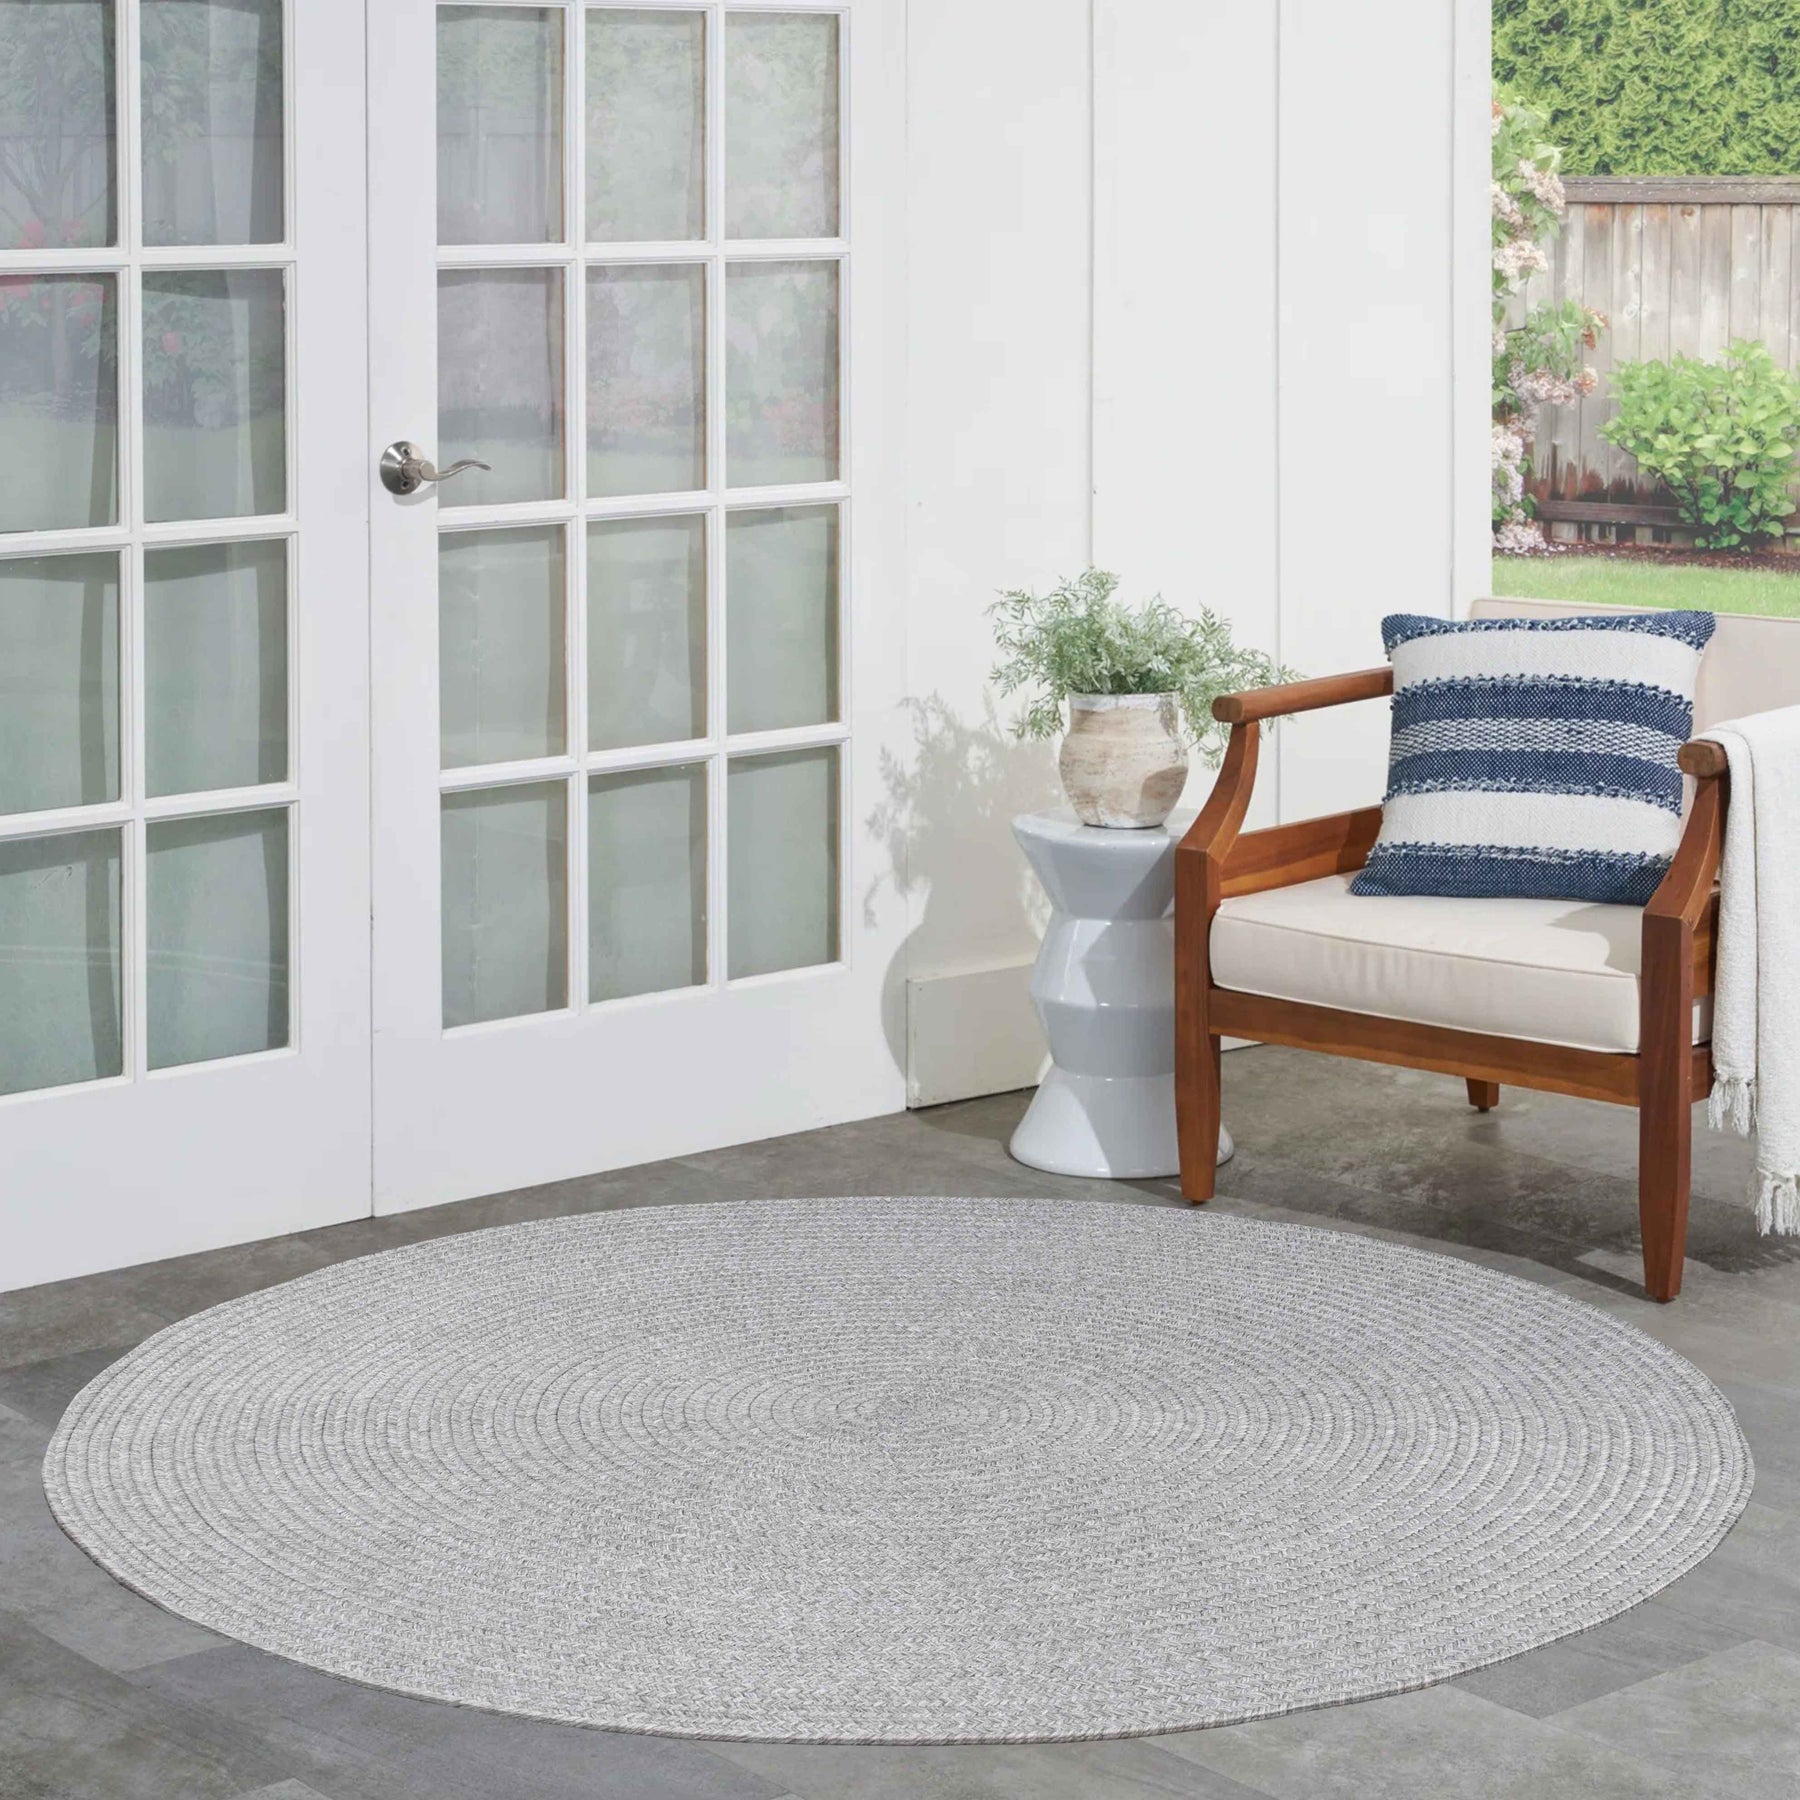 Bohemian Braided Indoor Outdoor Rugs Solid Round Area Rug - Slate